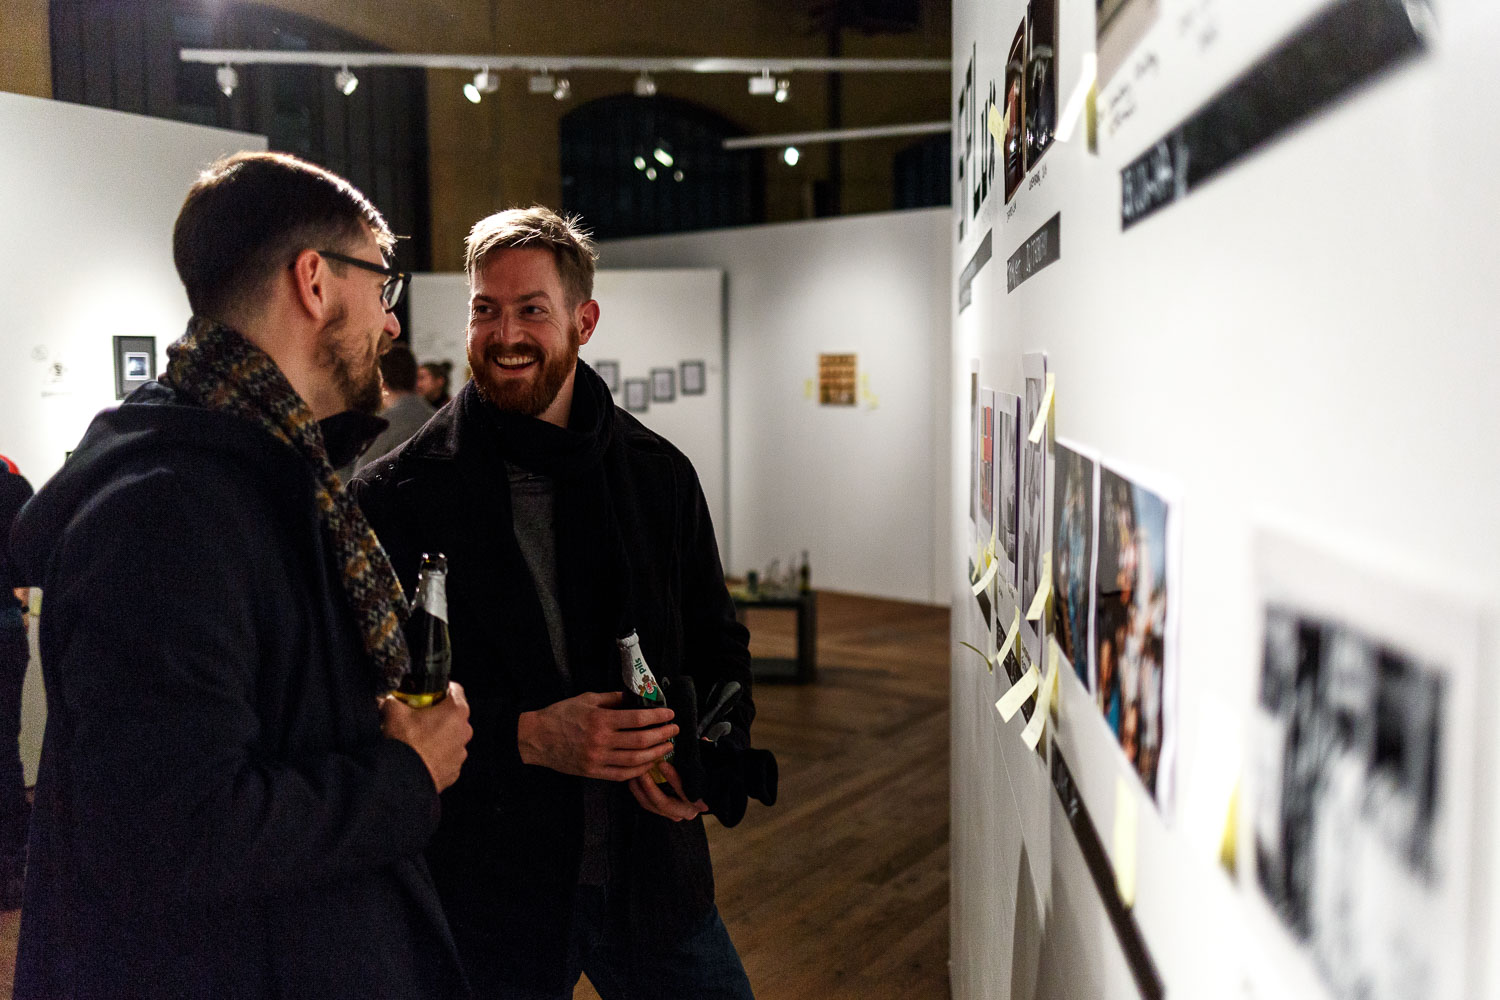 Troc'n'Brol 2016 at Rotondes - Art exchange in Luxembourg City - Photography by Christophe Van Biesen - Landscape and Travel Photographer from Luxembourg